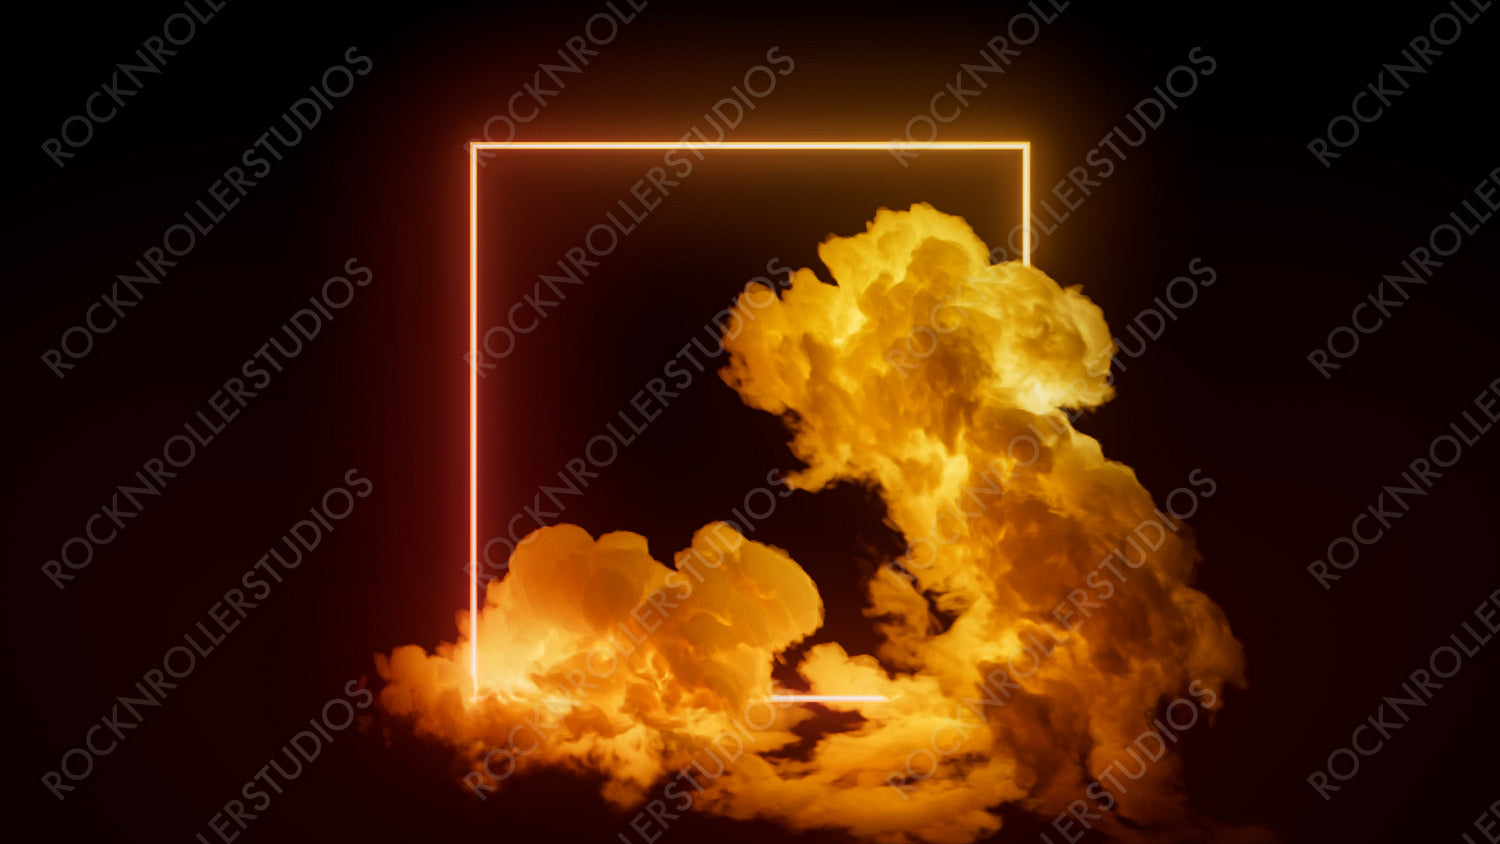 Orange and Yellow Neon Light with Cloud Formation. Square shaped Fluorescent Frame in Dark Environment.